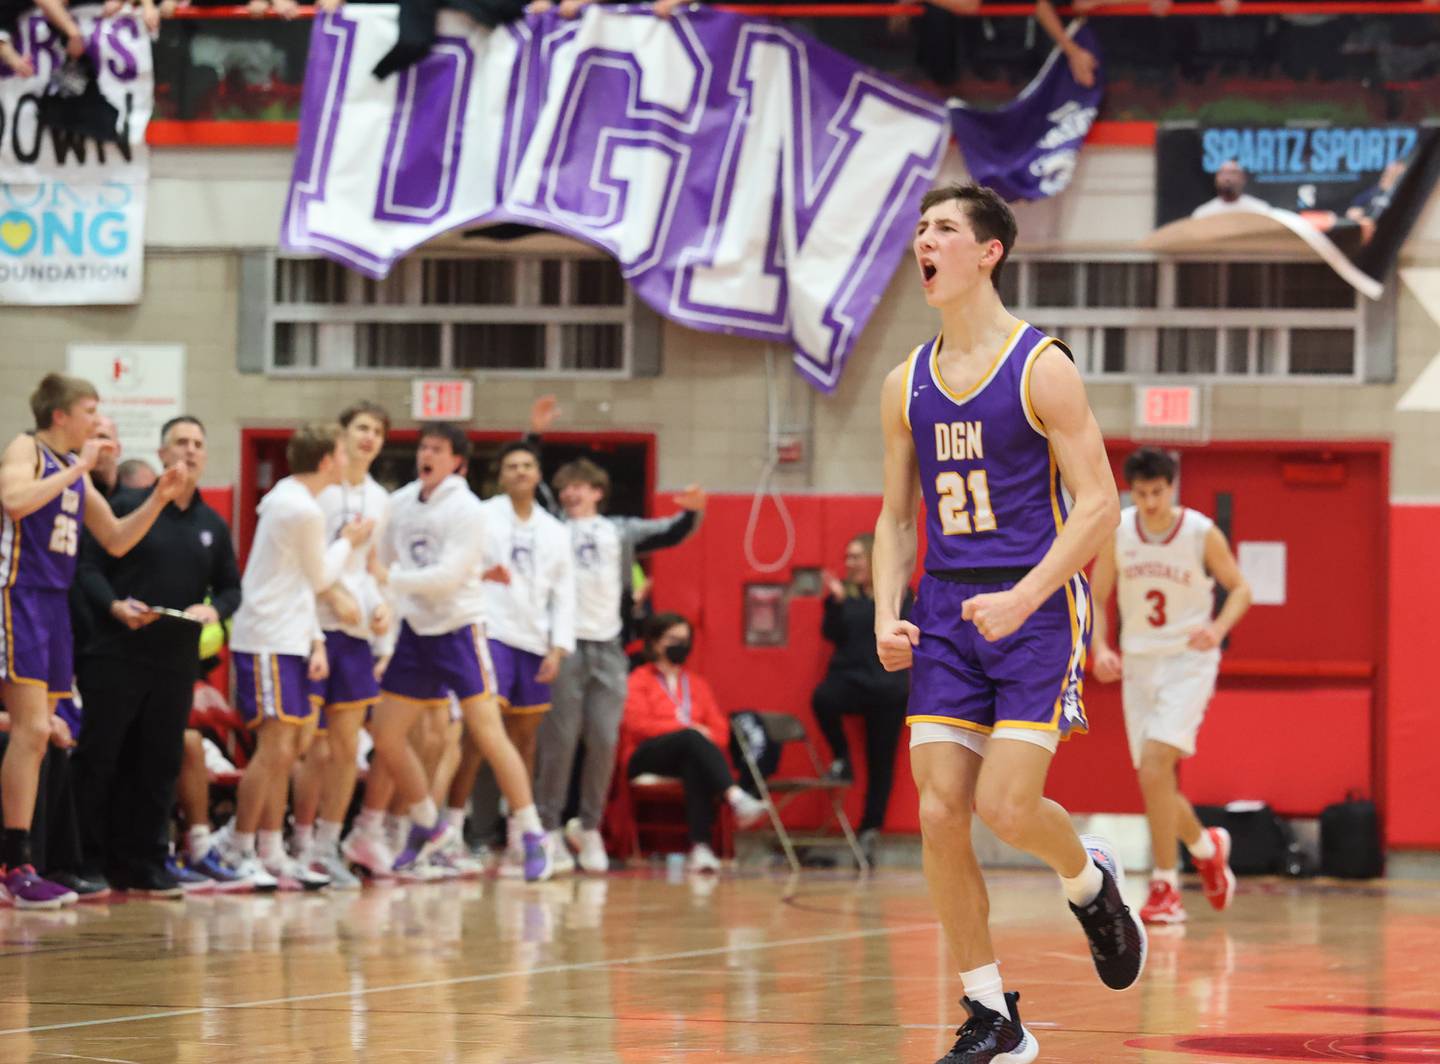 Downers Grove North's Jack Stanton (21) reacts to a three-point play during the boys 4A varsity sectional final game between Hinsdale Central and Downers Grove North high schools in Hinsdale on Friday, March 3, 2023.